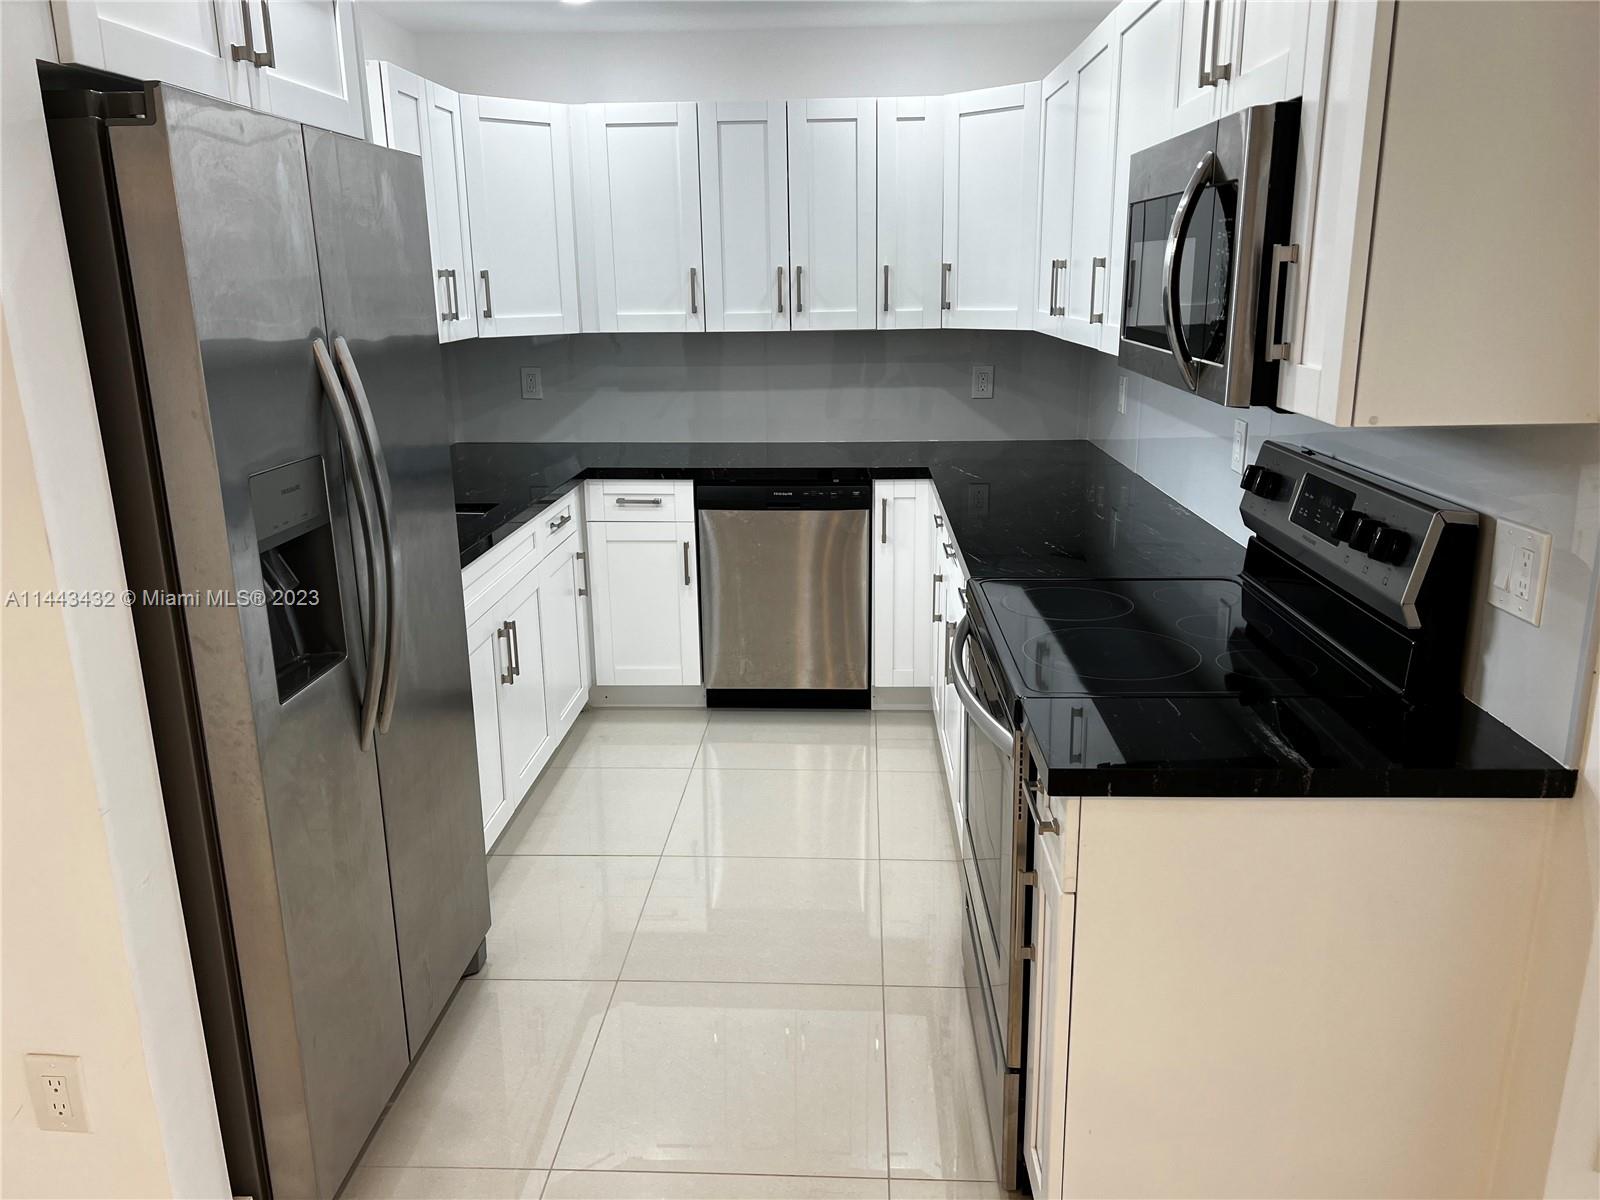 Beautifull, completely renovated unit with no expense spared. Enjoy all Gardens Of Kendall amentities including security, swimming pool, tennis courts, clubhouse & more.  Landlord requires 2 month security plus 1st month rent & good credit.